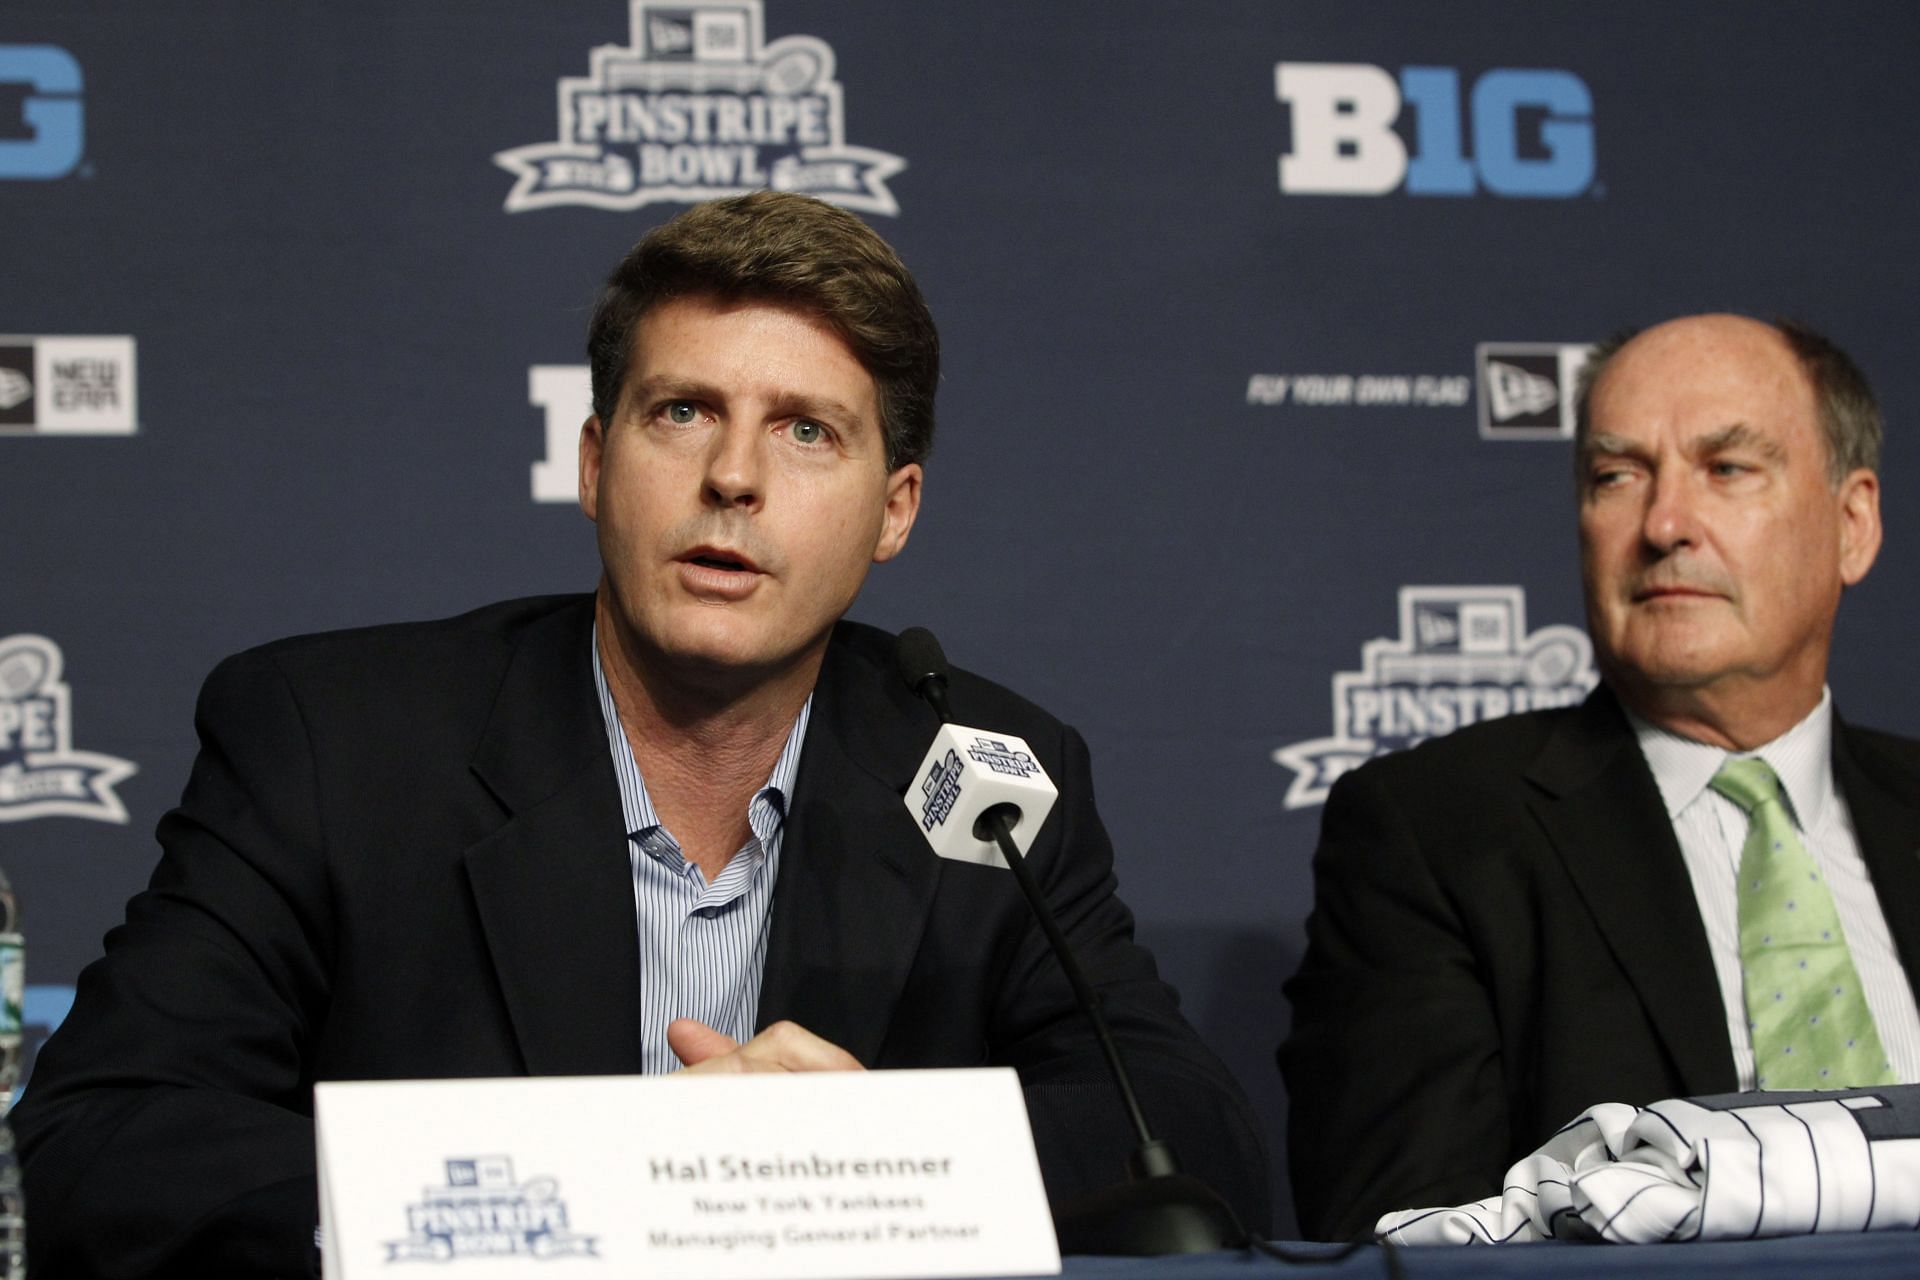 Hal Steinbrenner (L) and Jim Delany address the media during a press conference